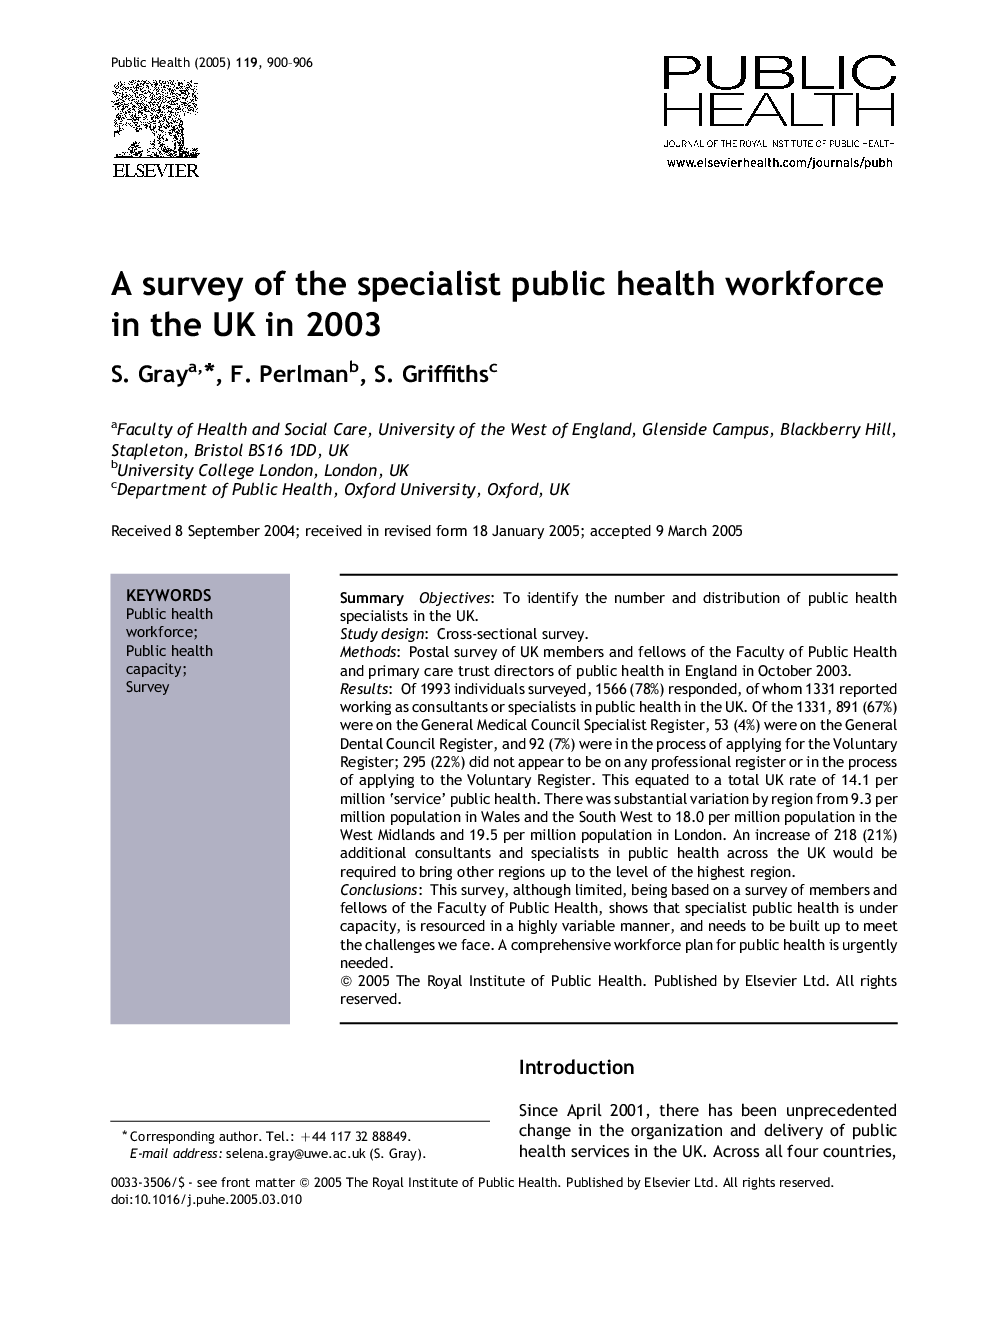 A survey of the specialist public health workforce in the UK in 2003